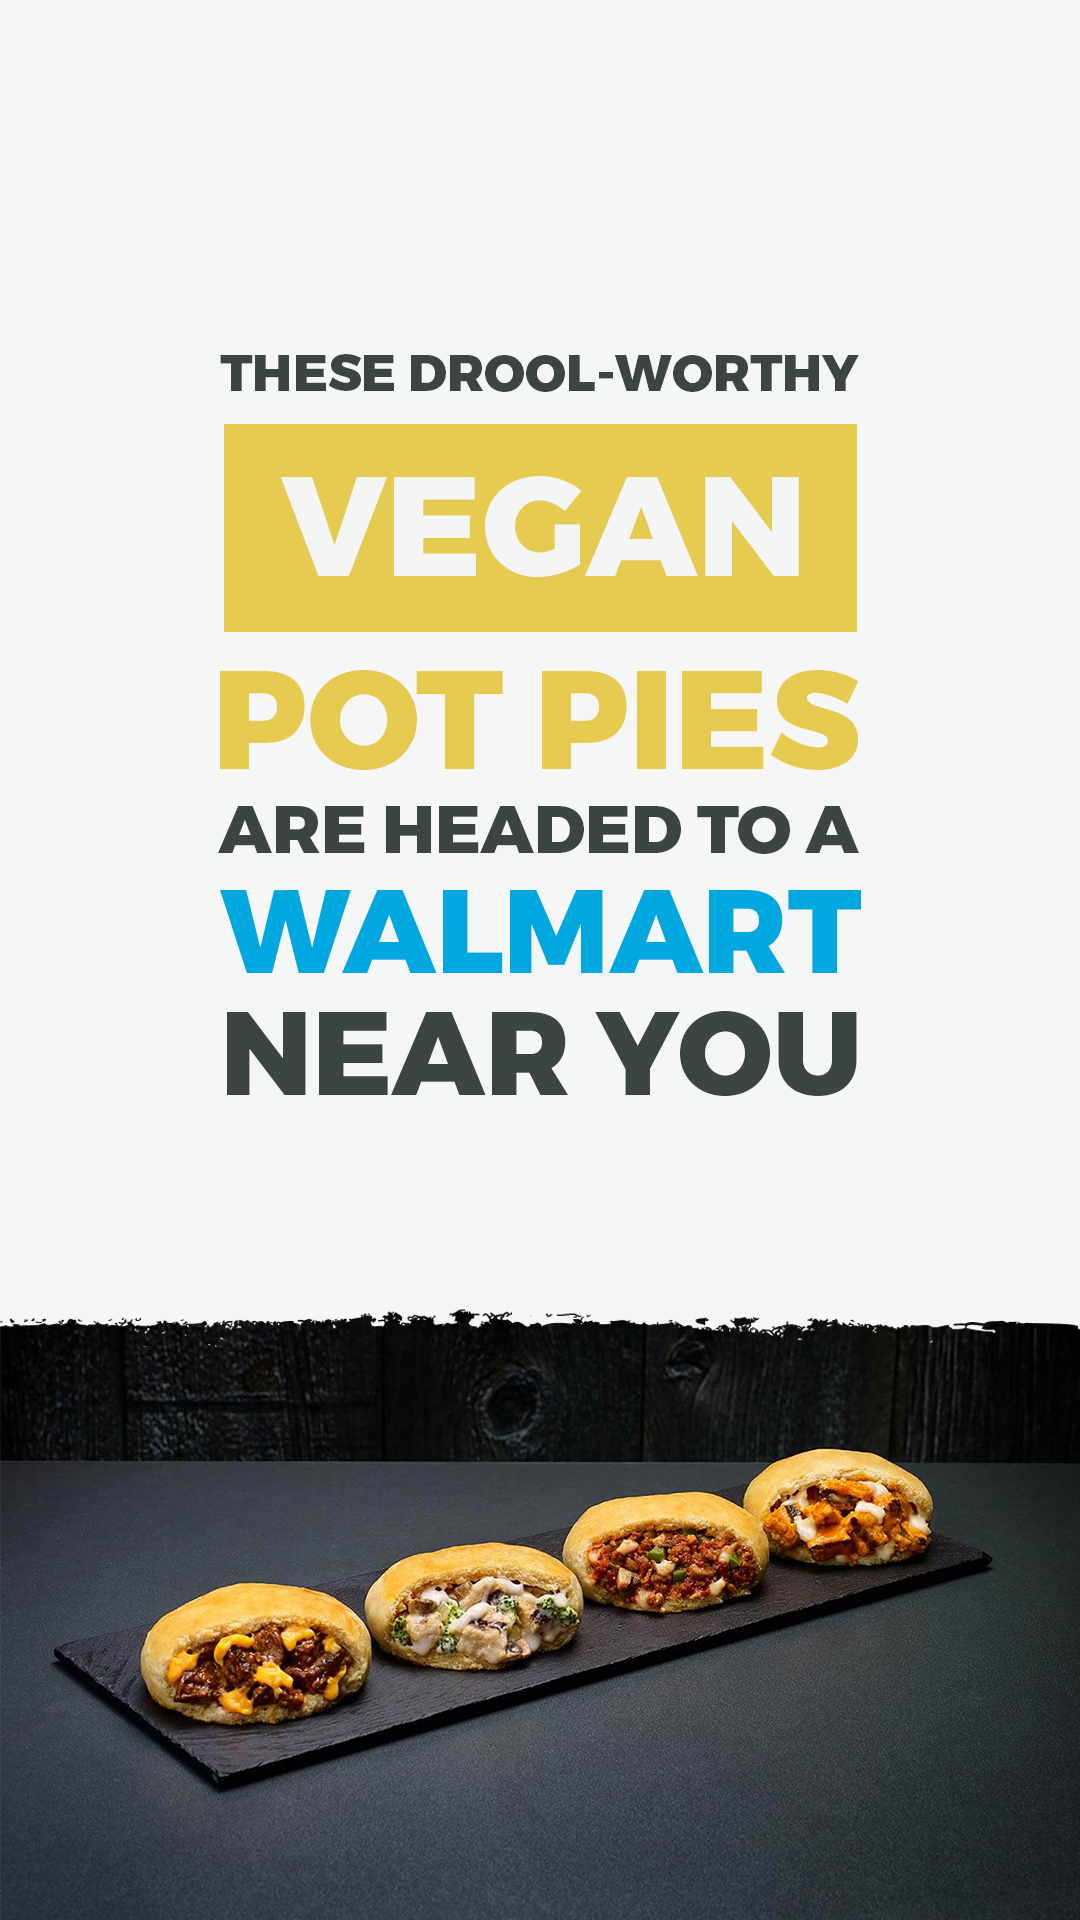 These Drool-Worthy Vegan Pot Pies Are Headed to a Walmart Near You